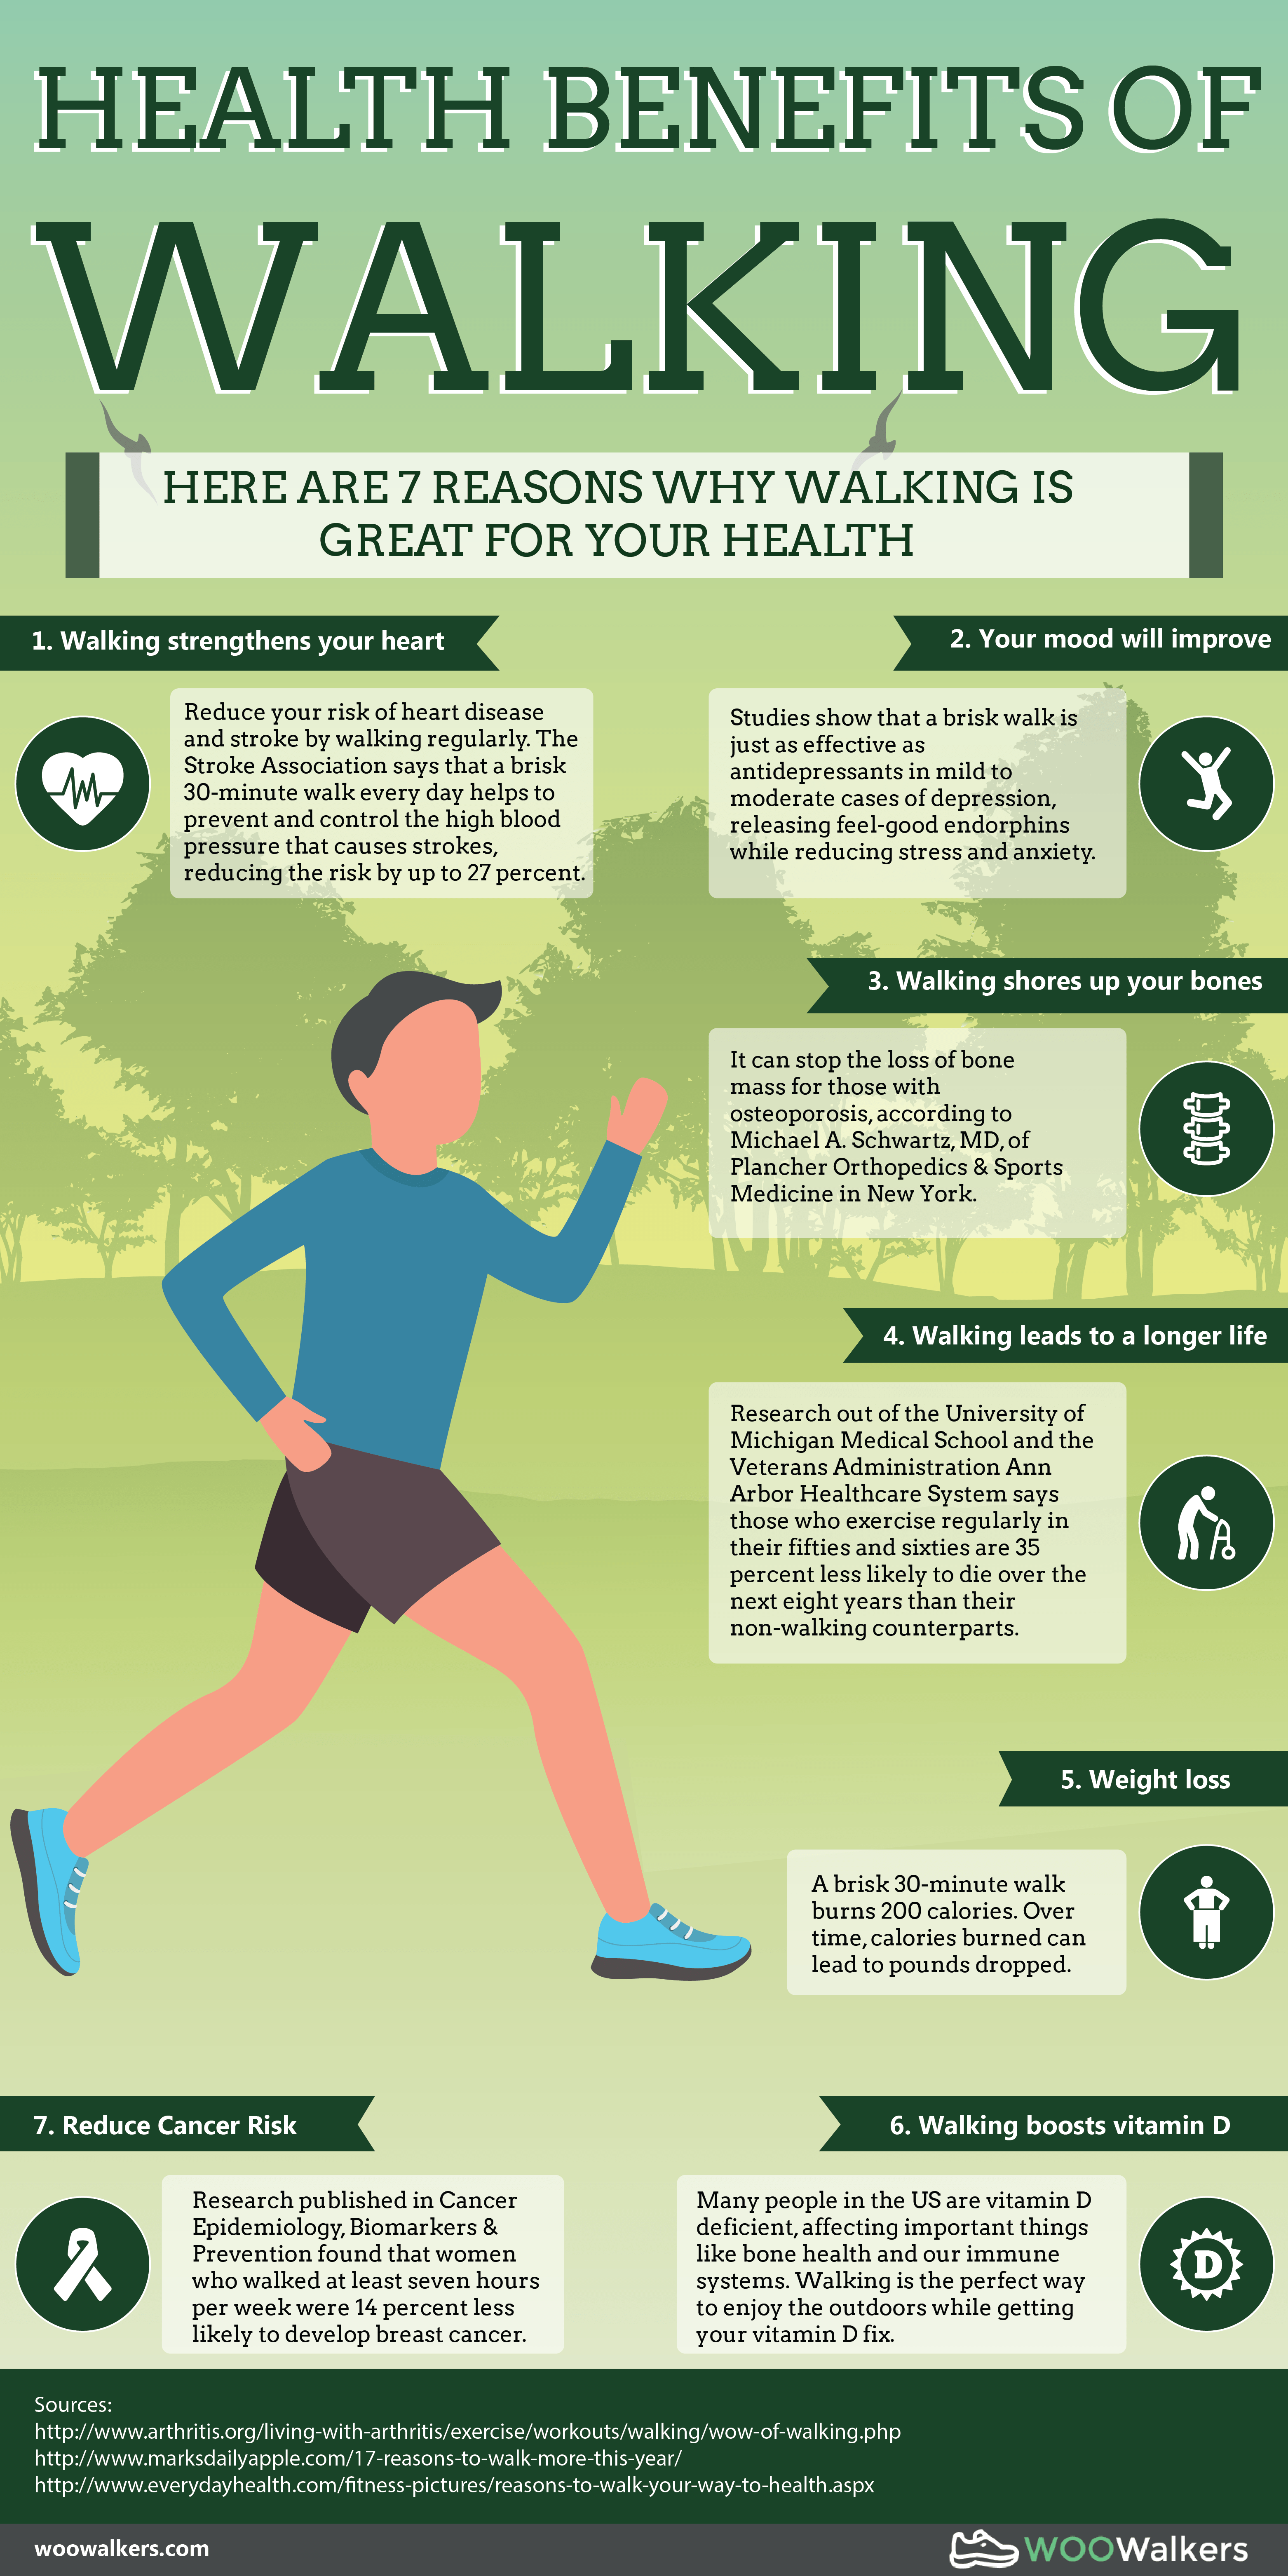 research on walking